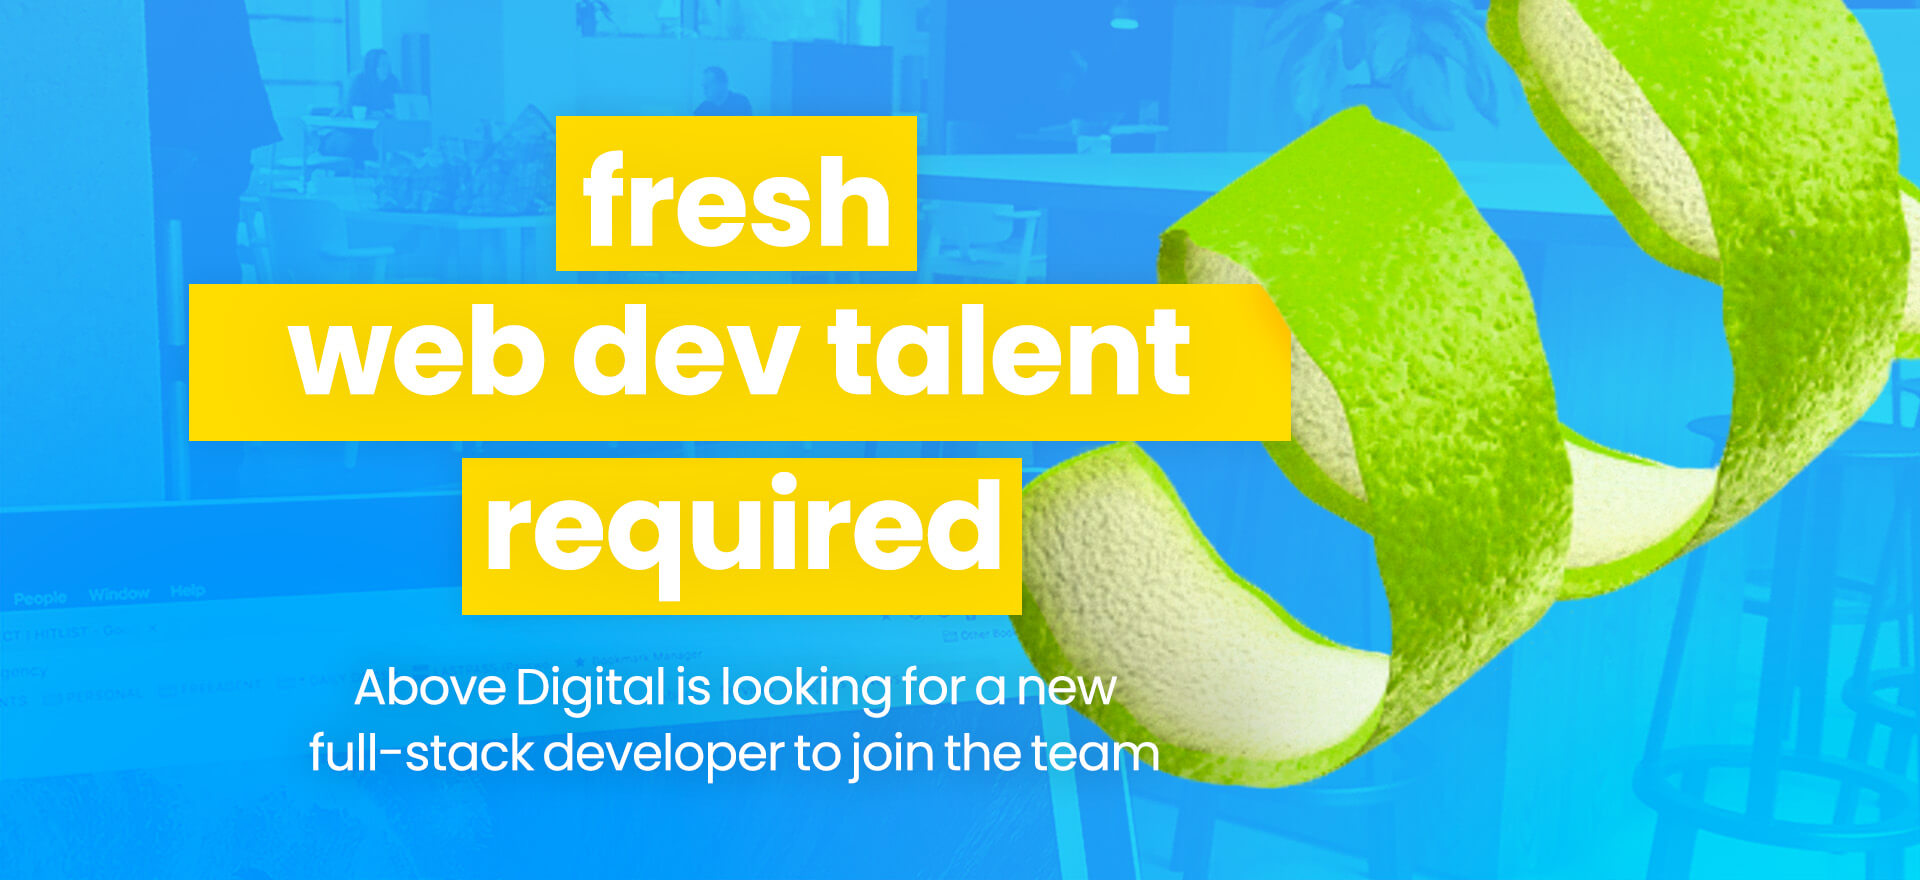 lime peel, behind the text, 'fresh web dev talent required' in advertisment of a new full-stack web developer role